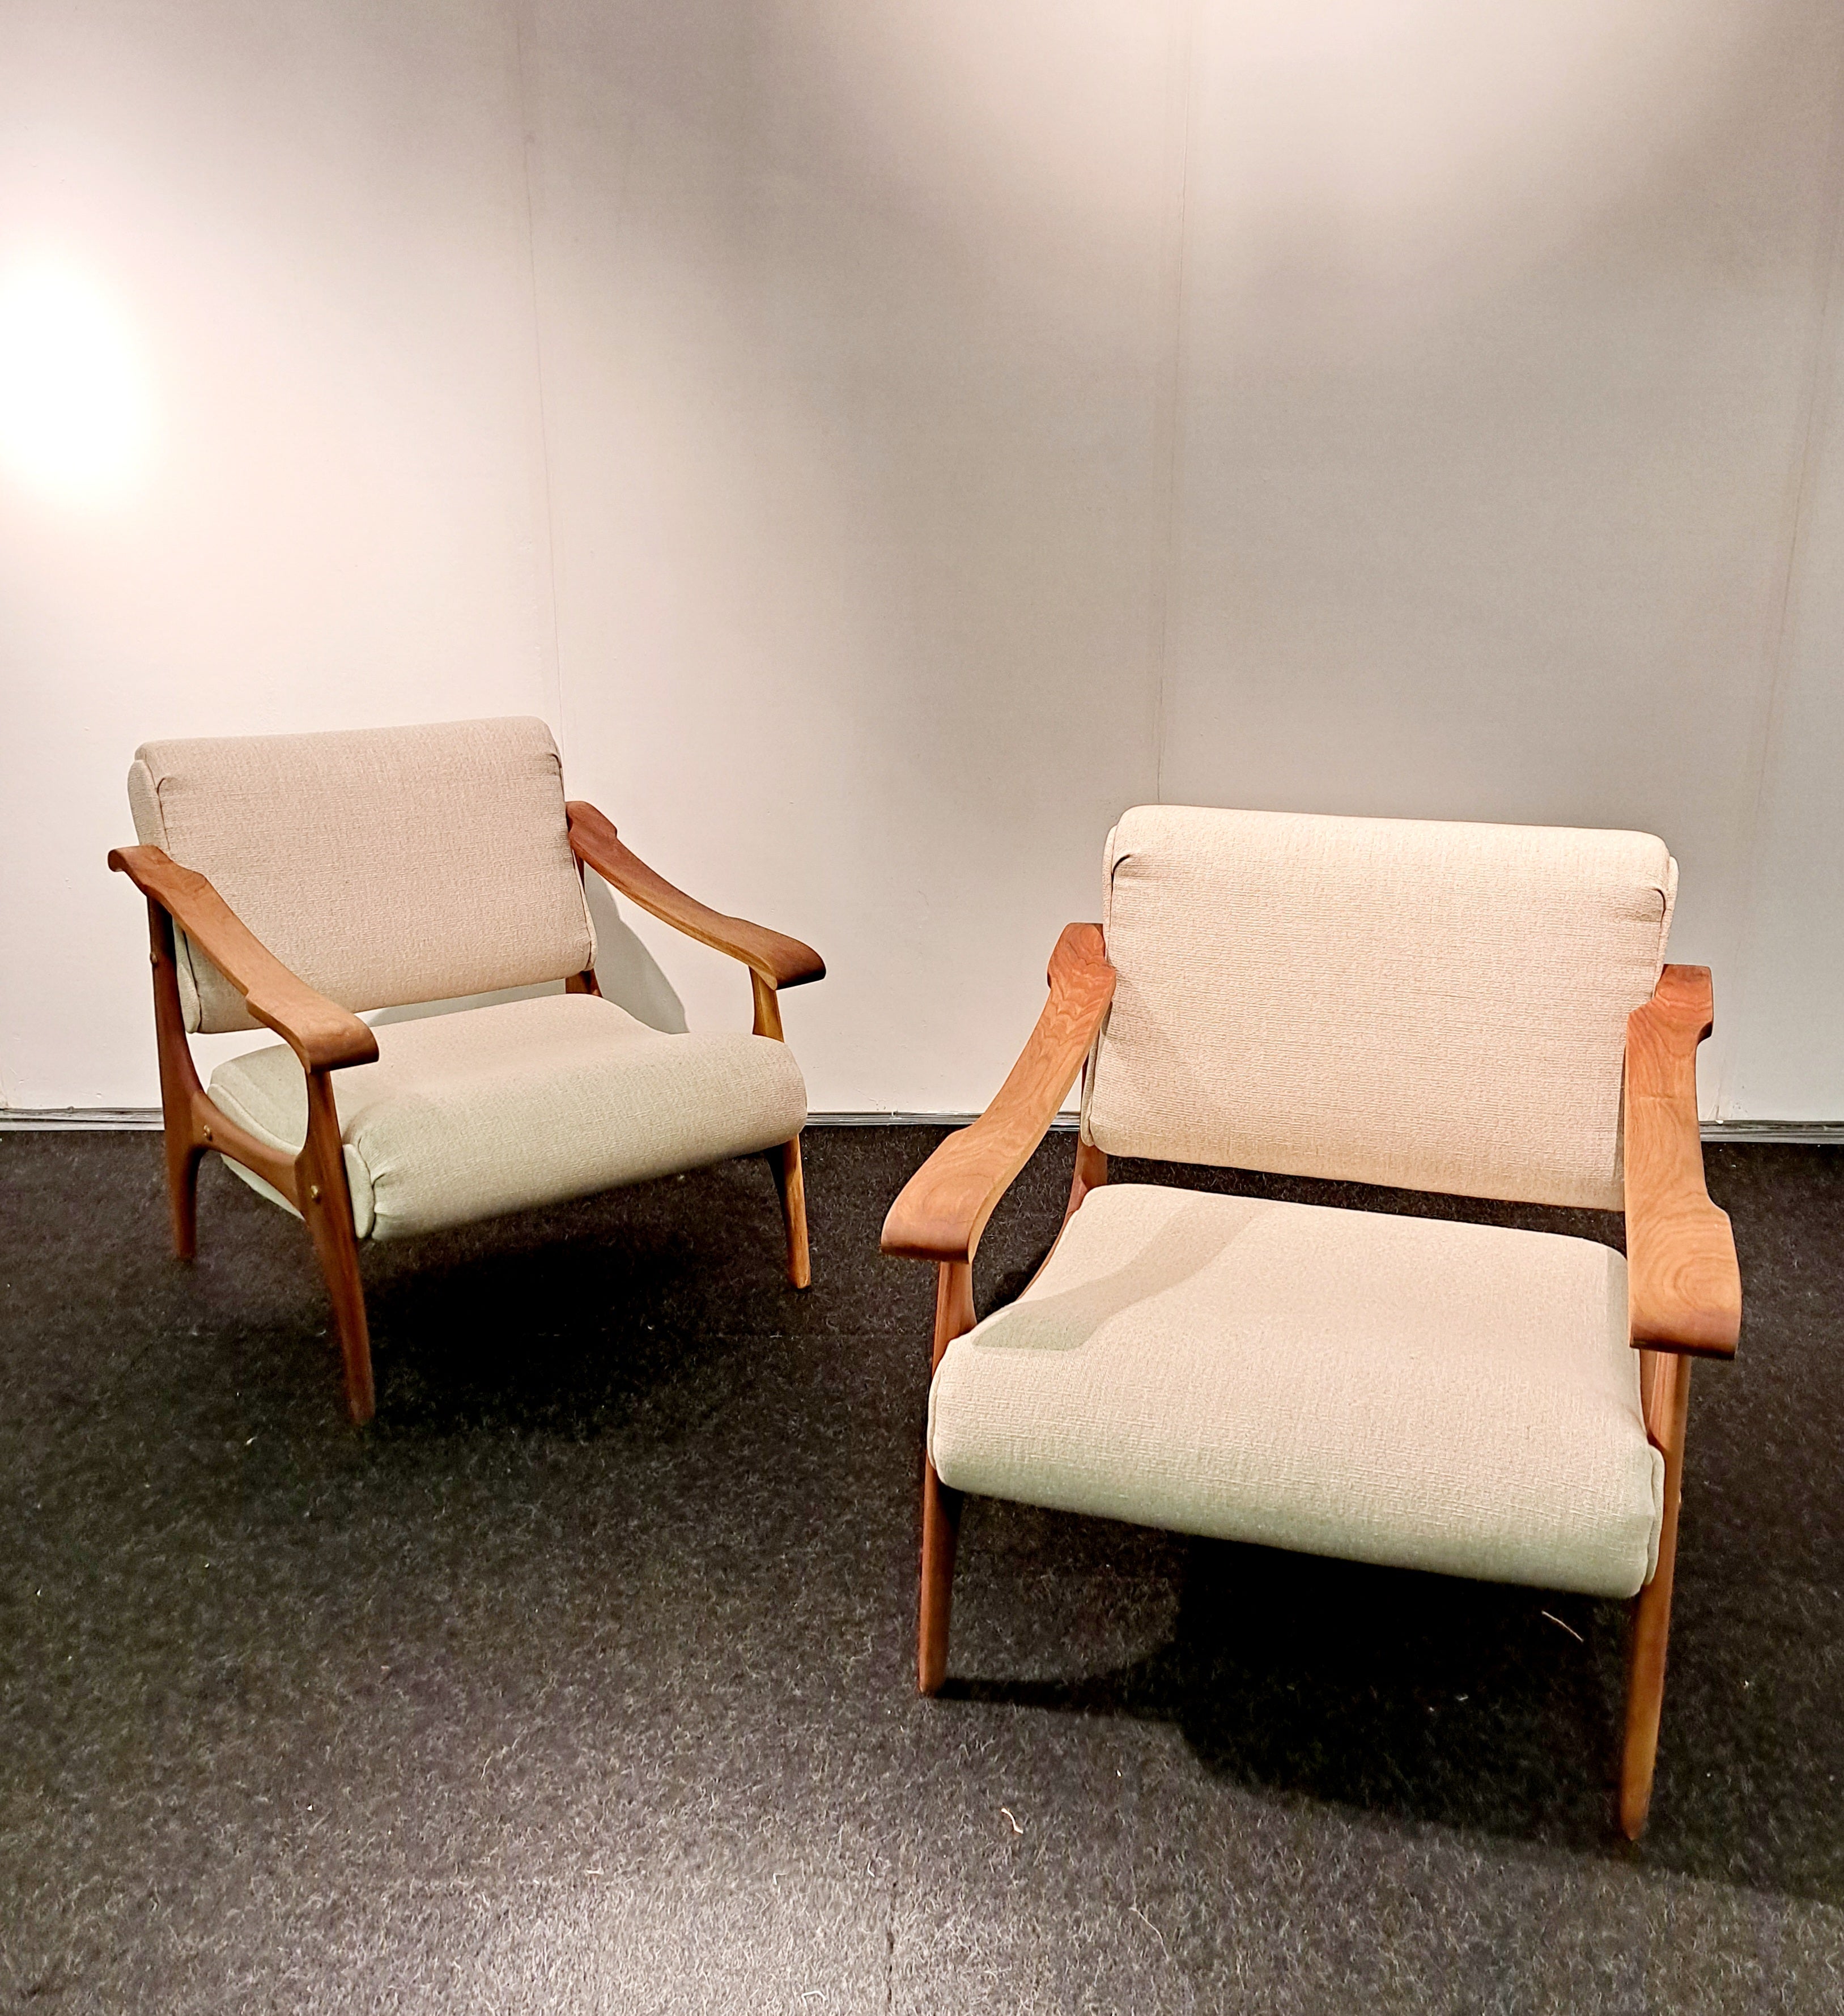 Pair of Italian Mid-Century armchairs newly upholstered in a cream linen.
Italy 1970s. The seat and backrest are suspended between an elegant walnut frame with brass fittings. 

Made in solid walnut, restored and reupholstered in a cream